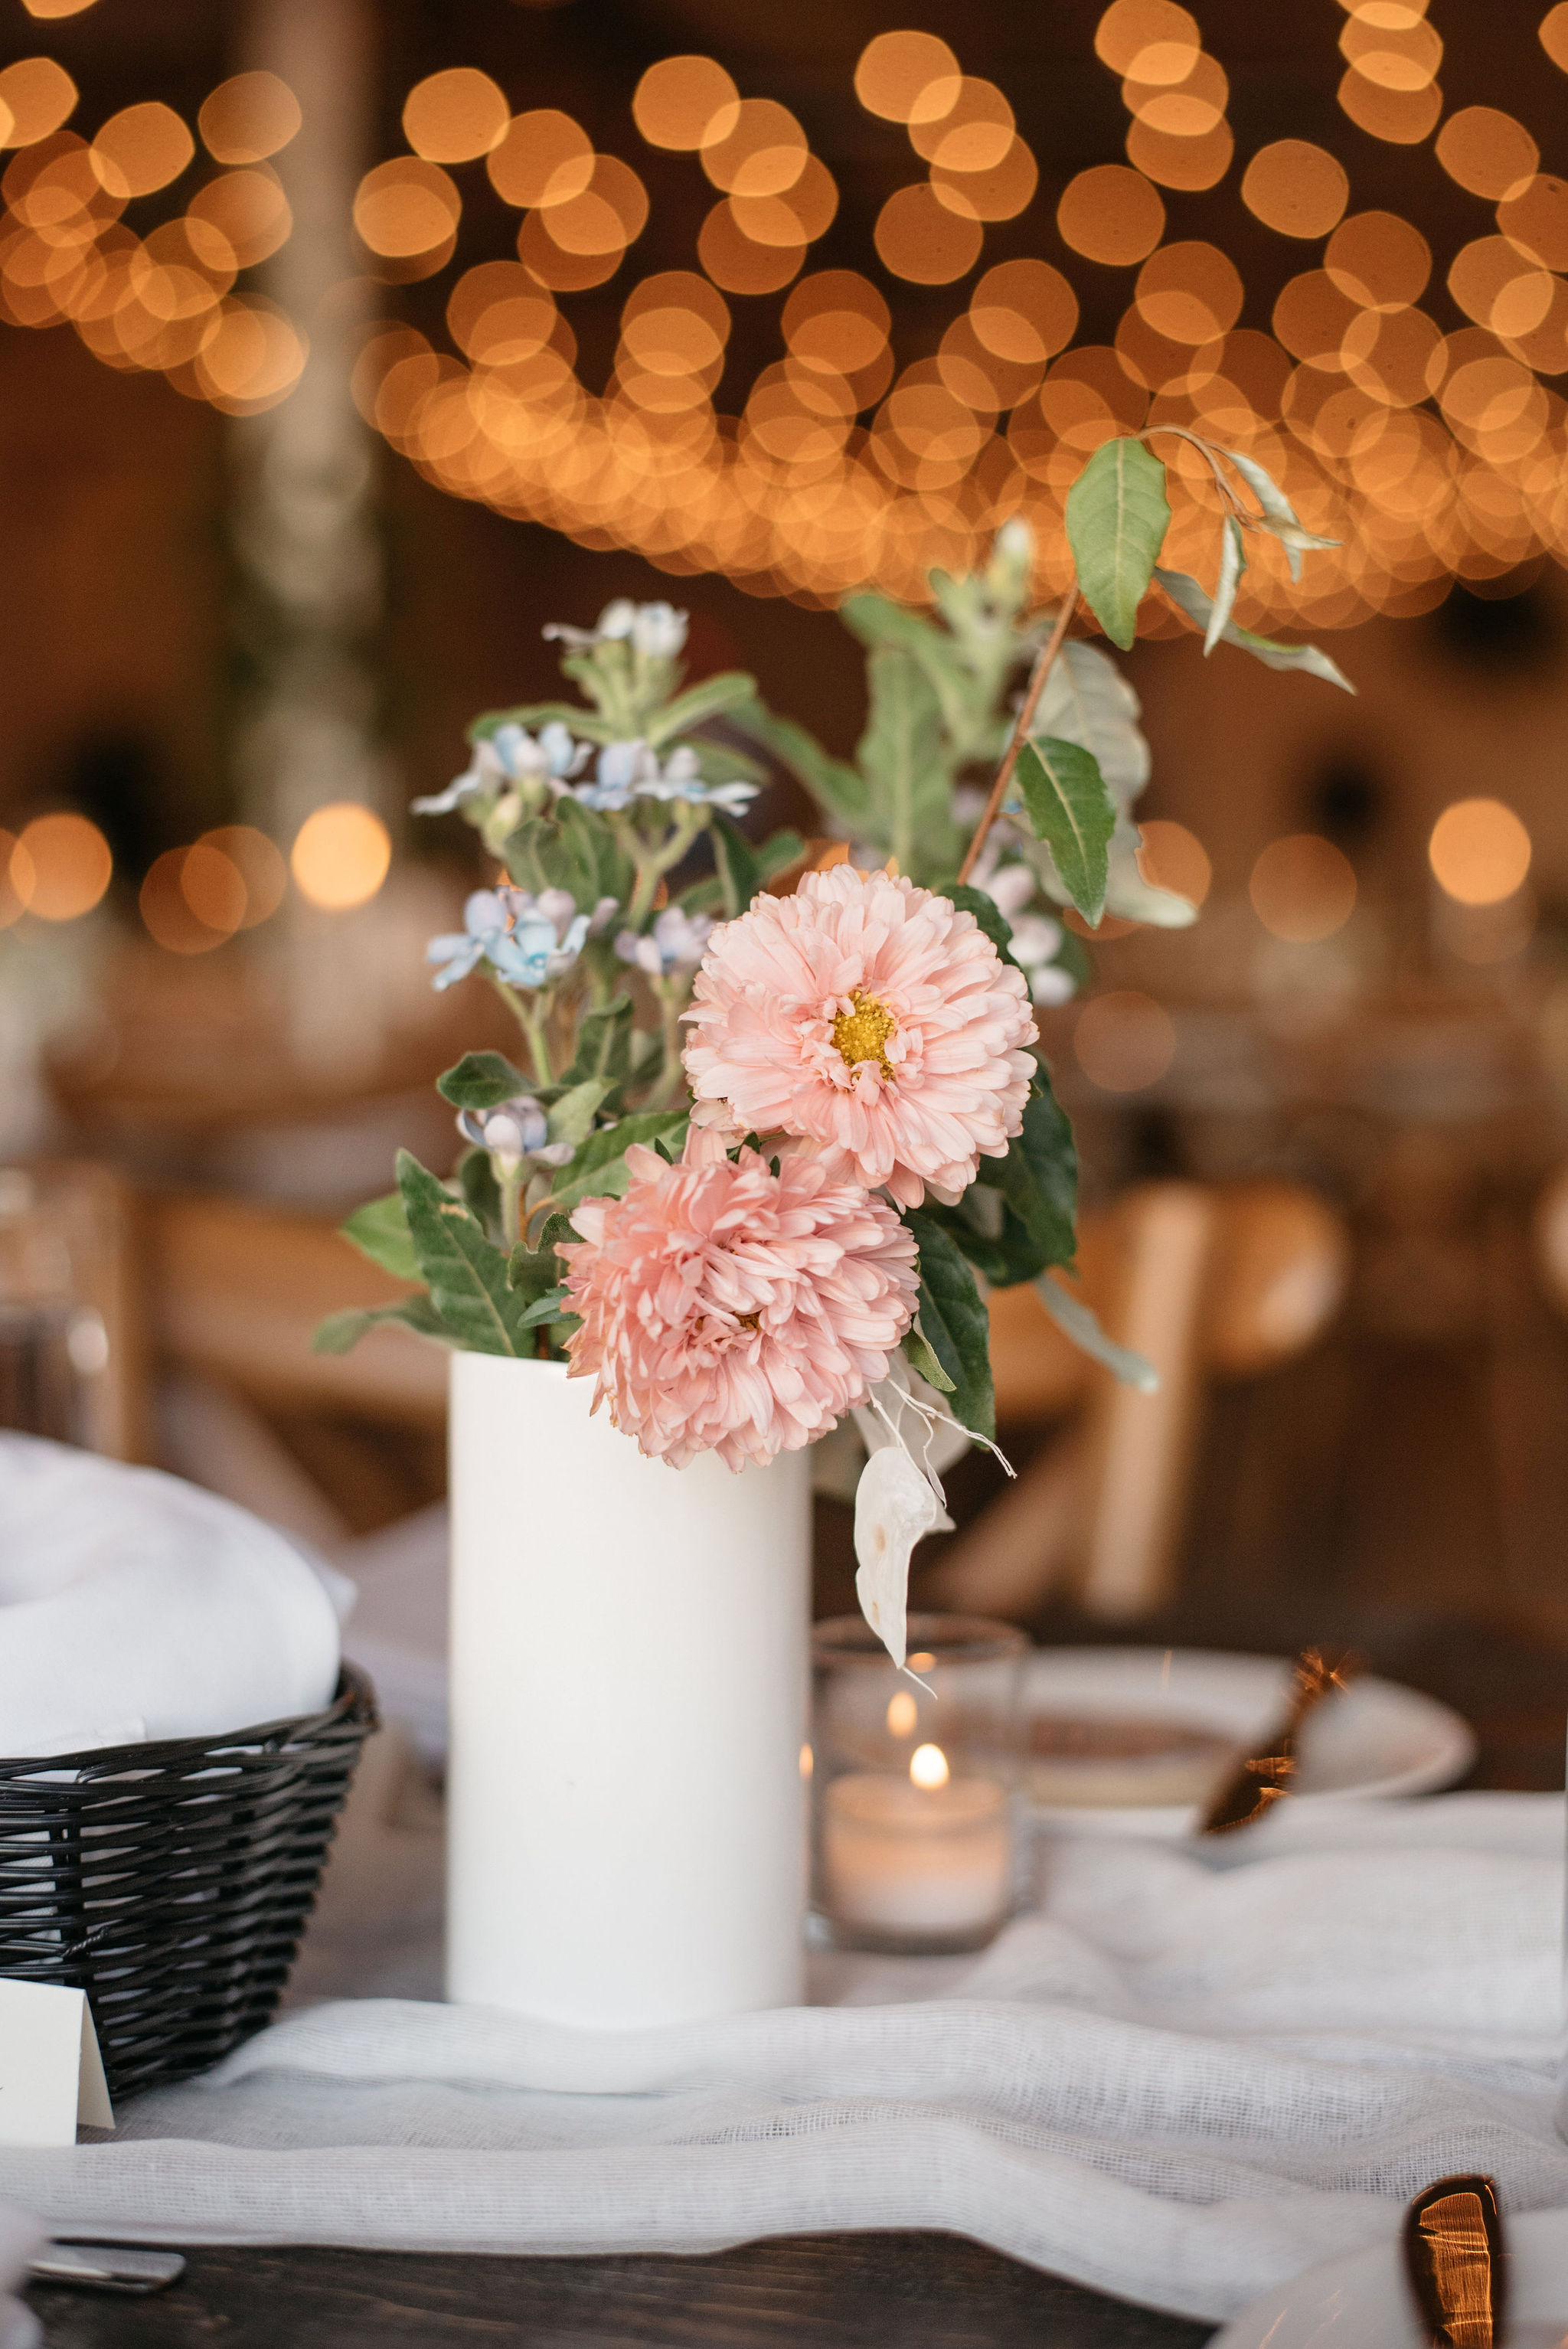 Potted plants centrepieces | Olive Photography Toronto